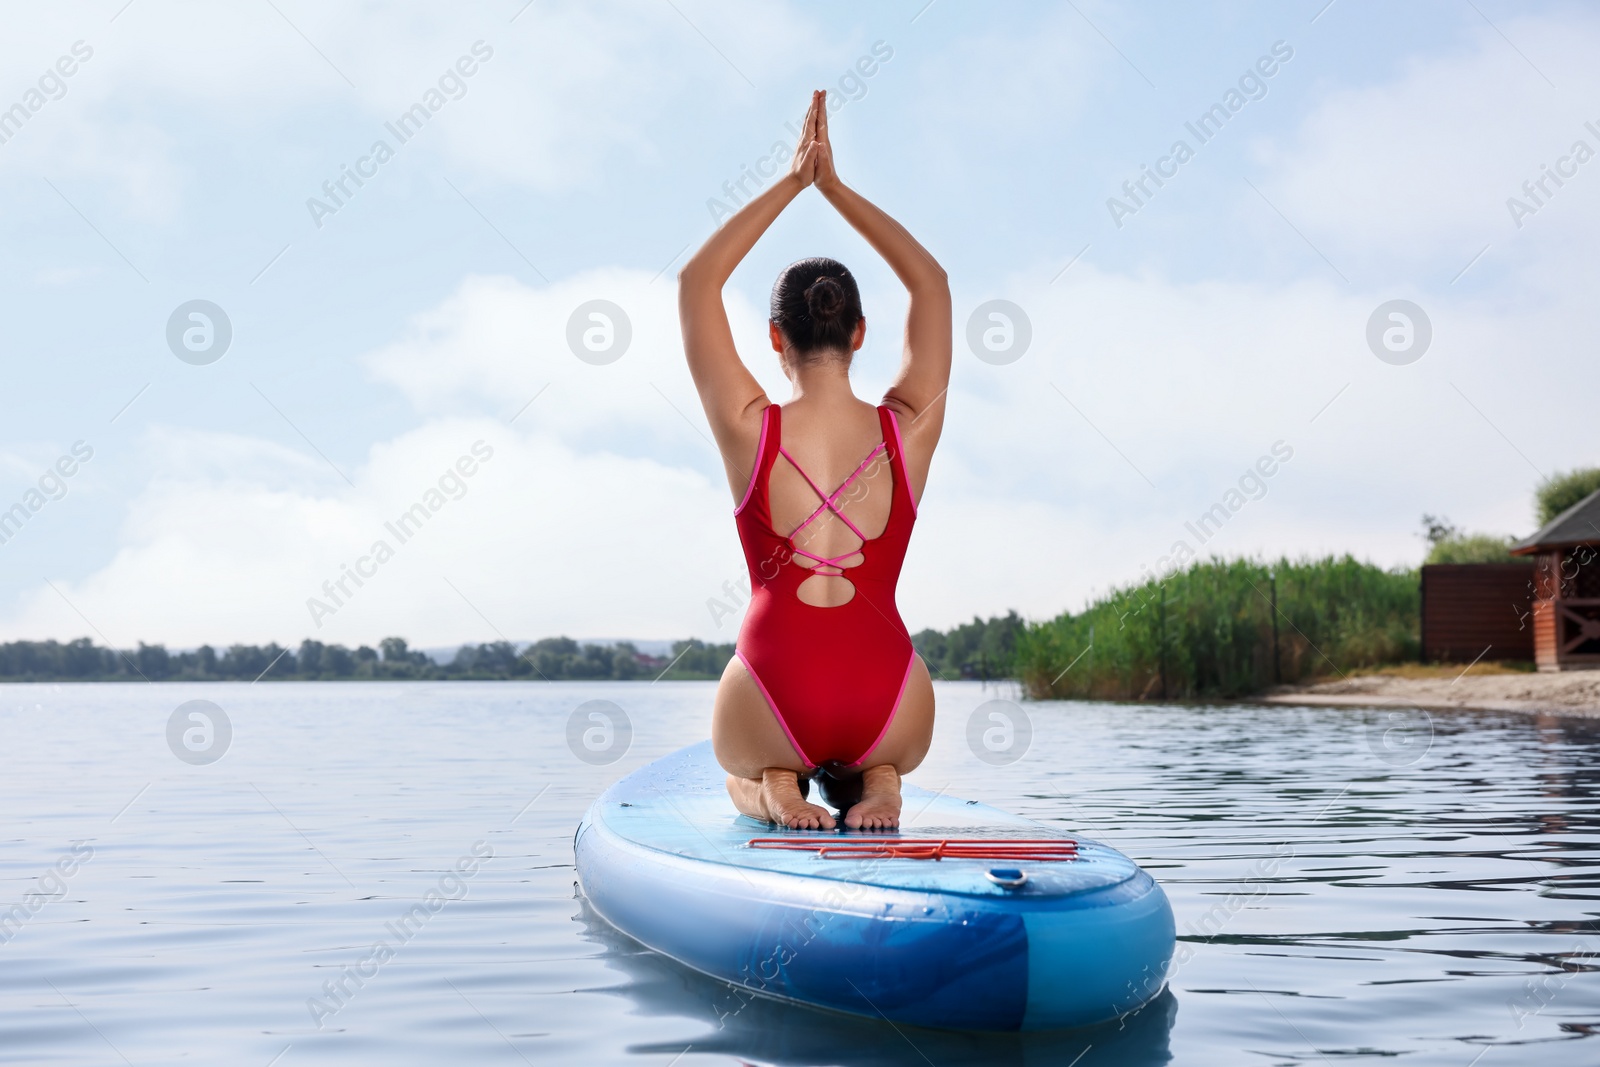 Photo of Woman practicing yoga on light blue SUP board on river, back view